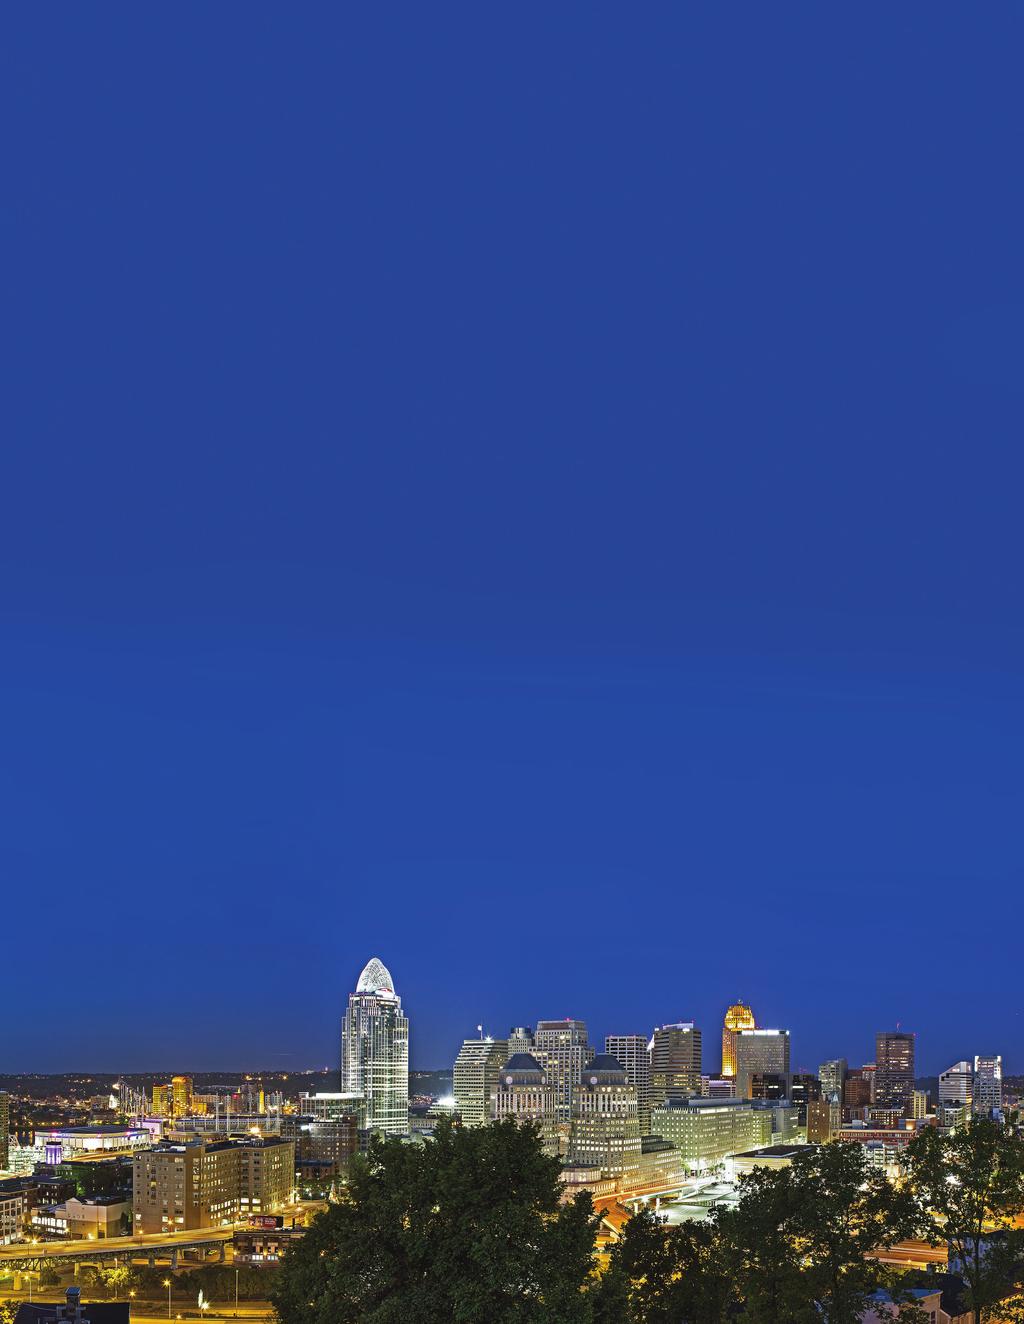 GET THE BEST TALENT AT A BETTER COST Access a diverse and talented industry workforce of more than 117,000 within 50 miles of Cincinnati s city center which is almost 13 percent of our region s